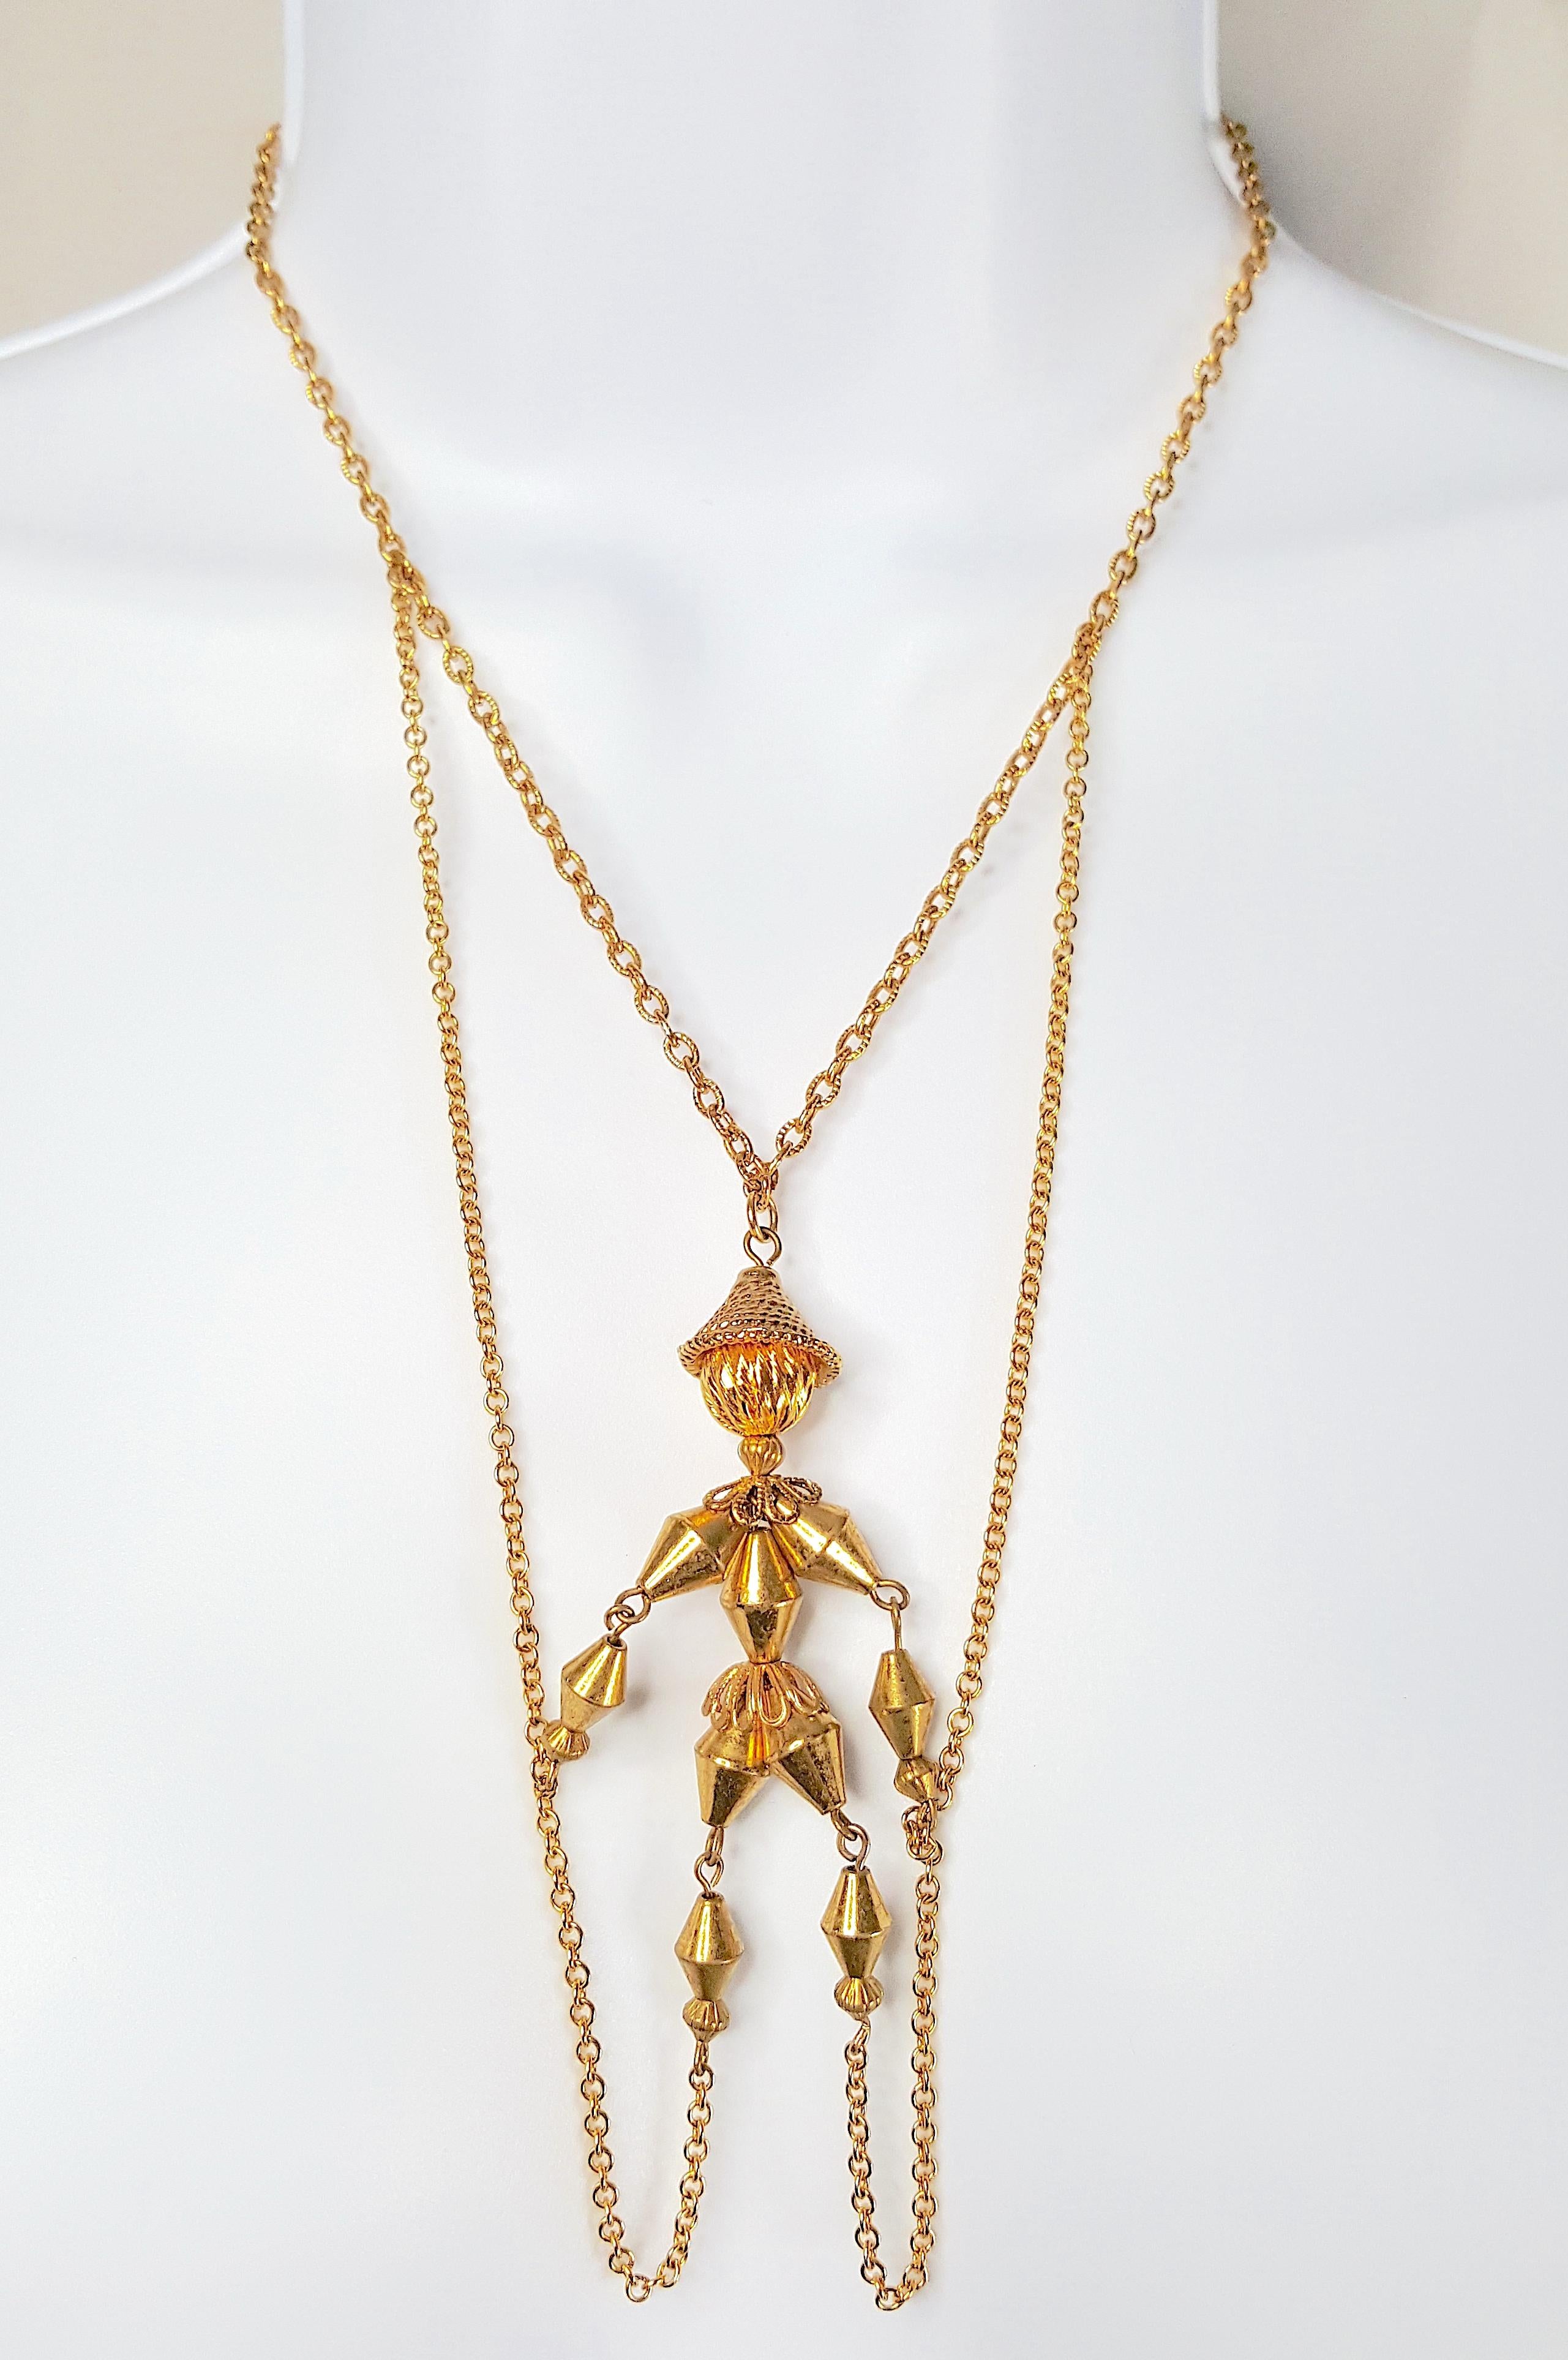 Acquired in The States and likely inspired by the American 1938-commissioned animated-feature movie, Pinocchio, that was produced for two years by Walt Disney based on an Italian children's story, this unsigned pre-WWII yellow-gold-gilt brass